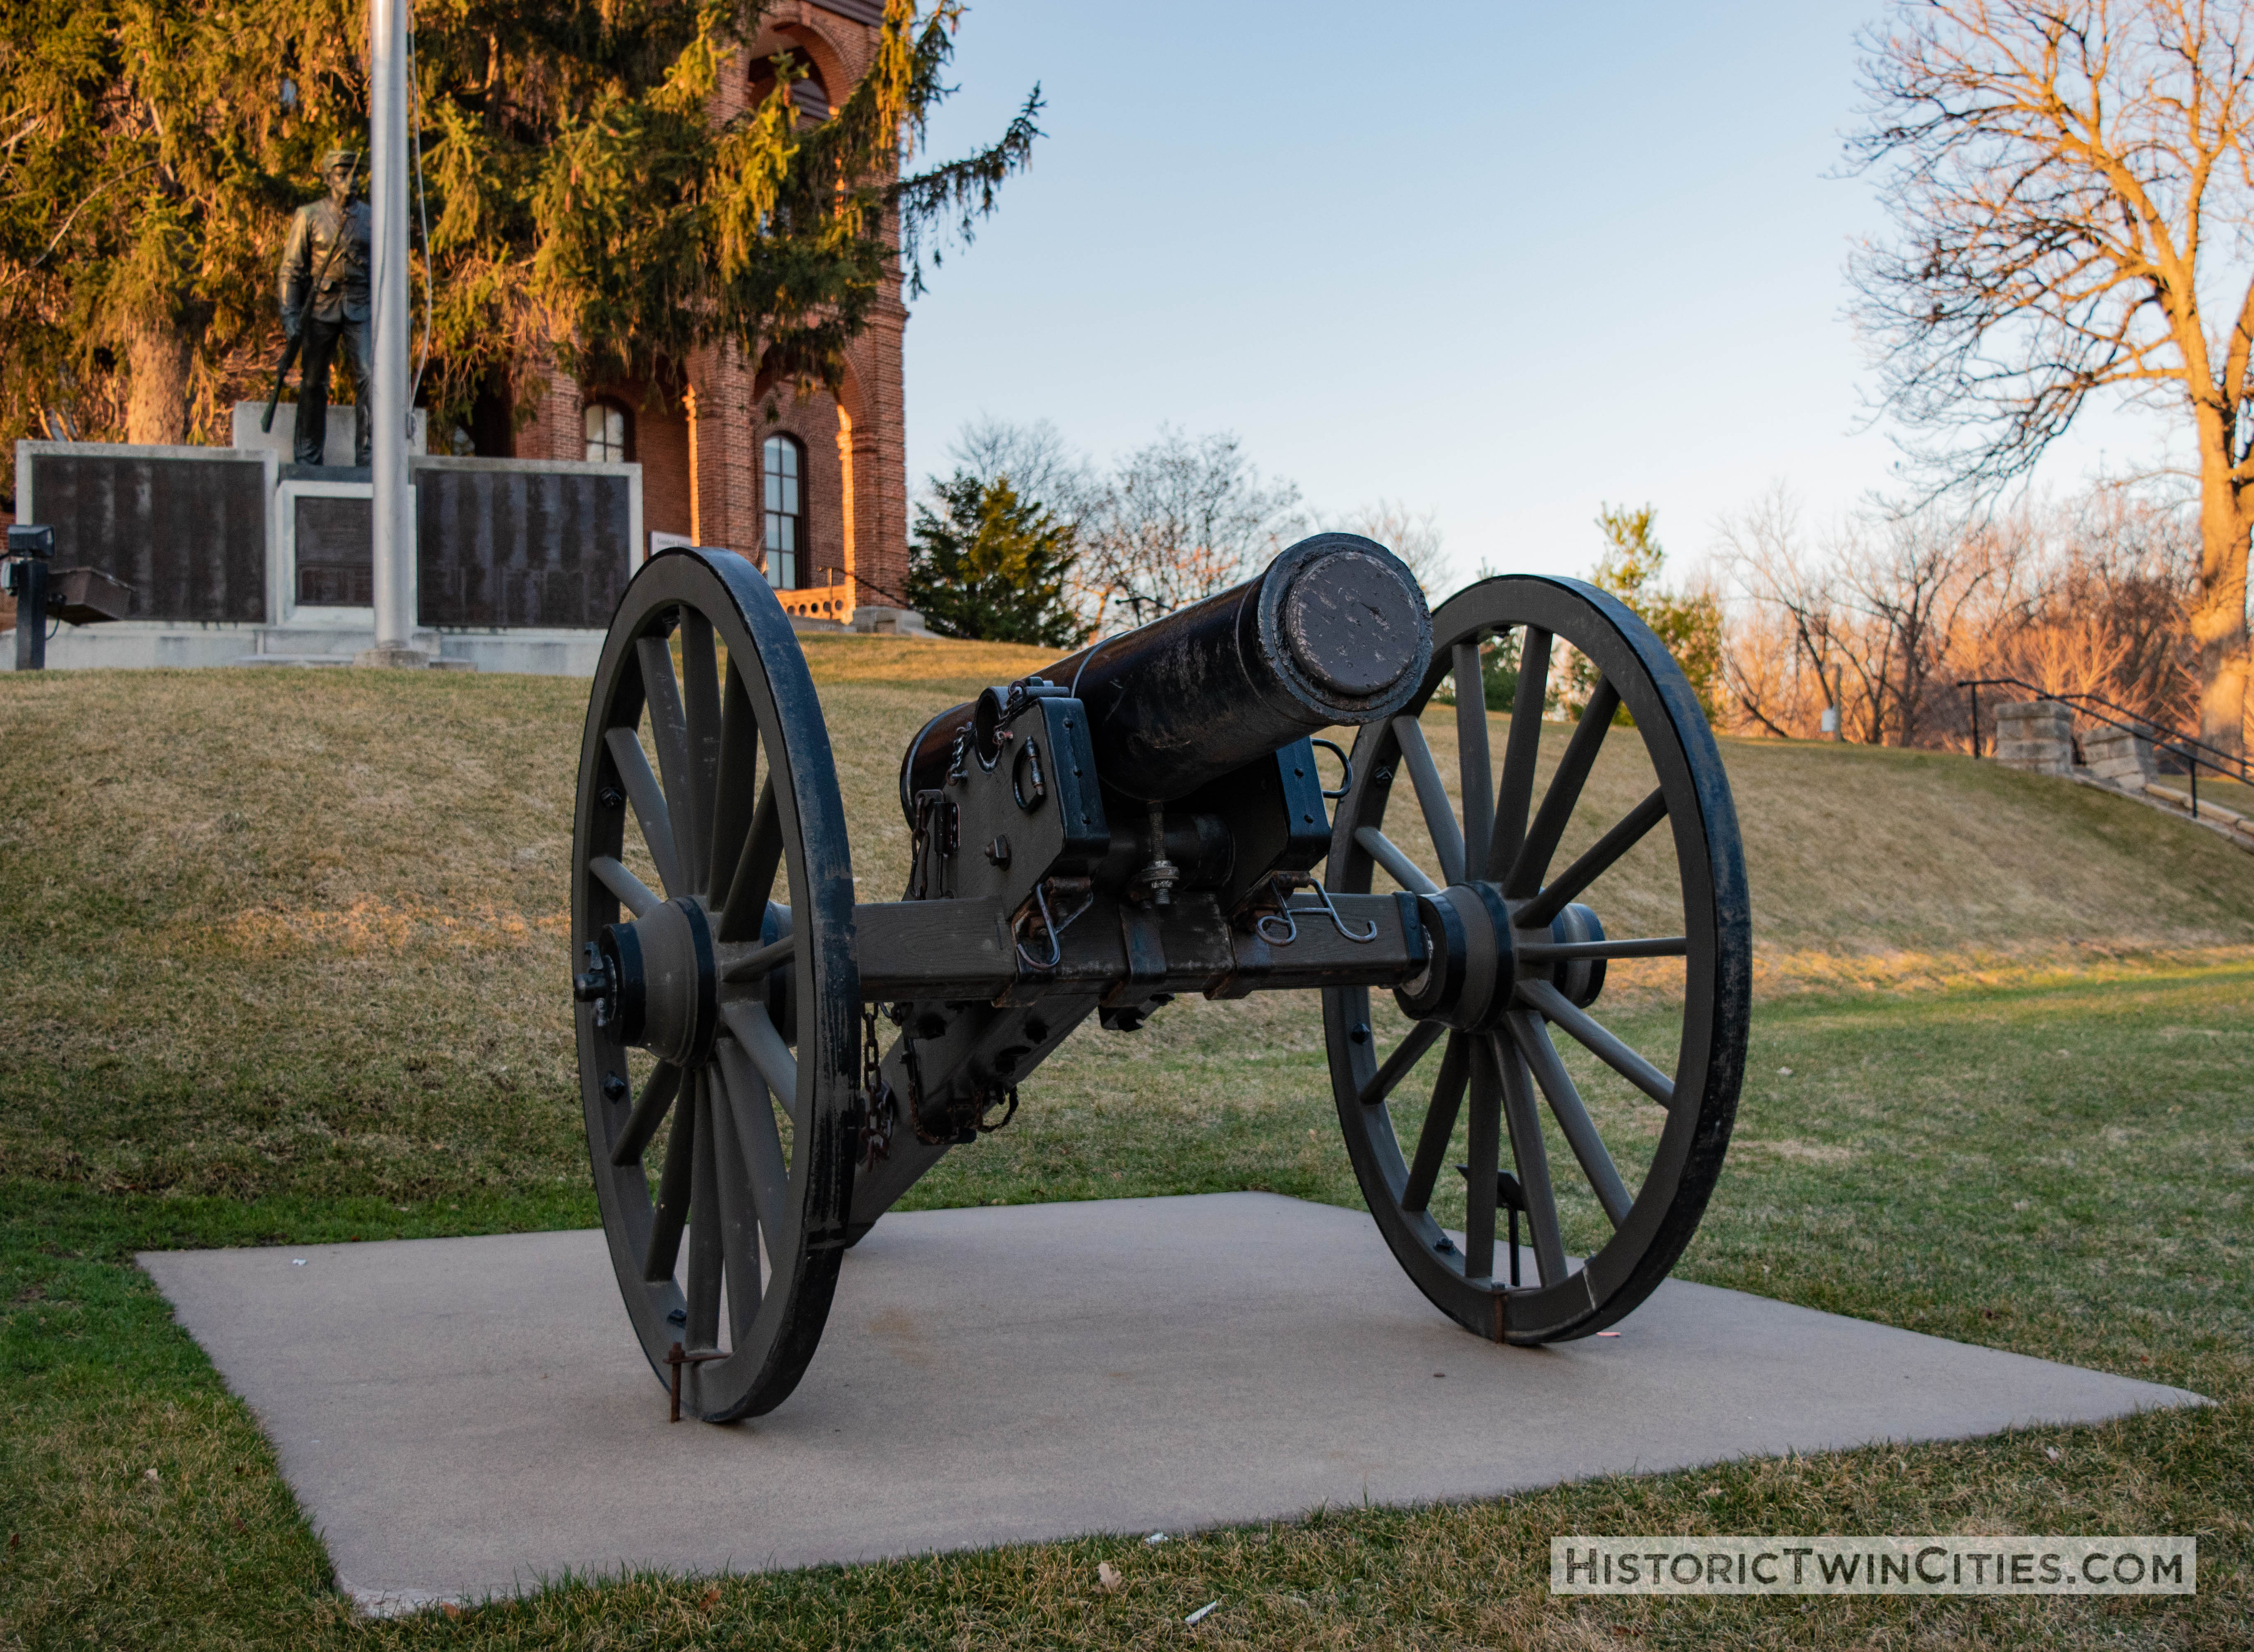 Cannon on the front lawn of the Historic Washington County Courthouse - Stillwater, MN